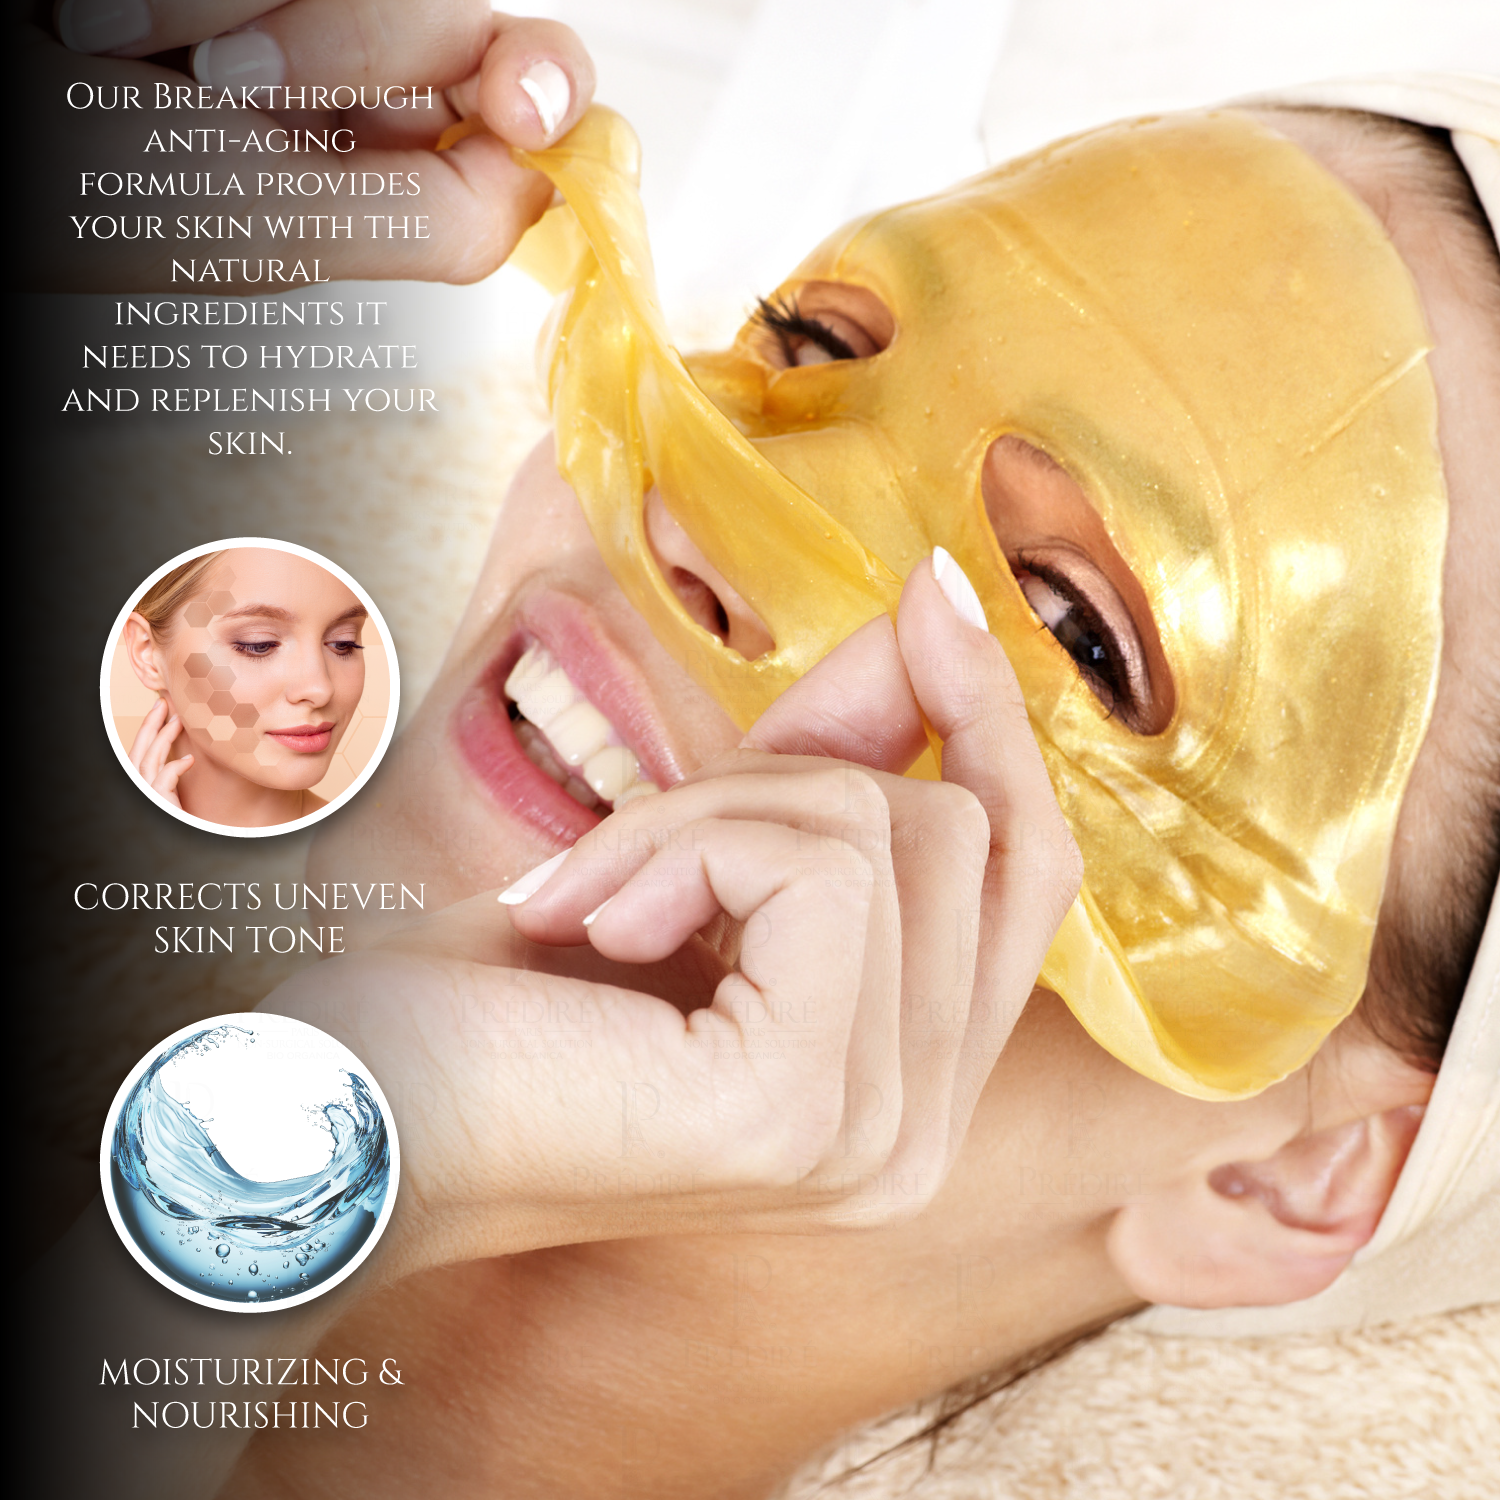 Our breakthrough anti-aging masks have been designed to provide